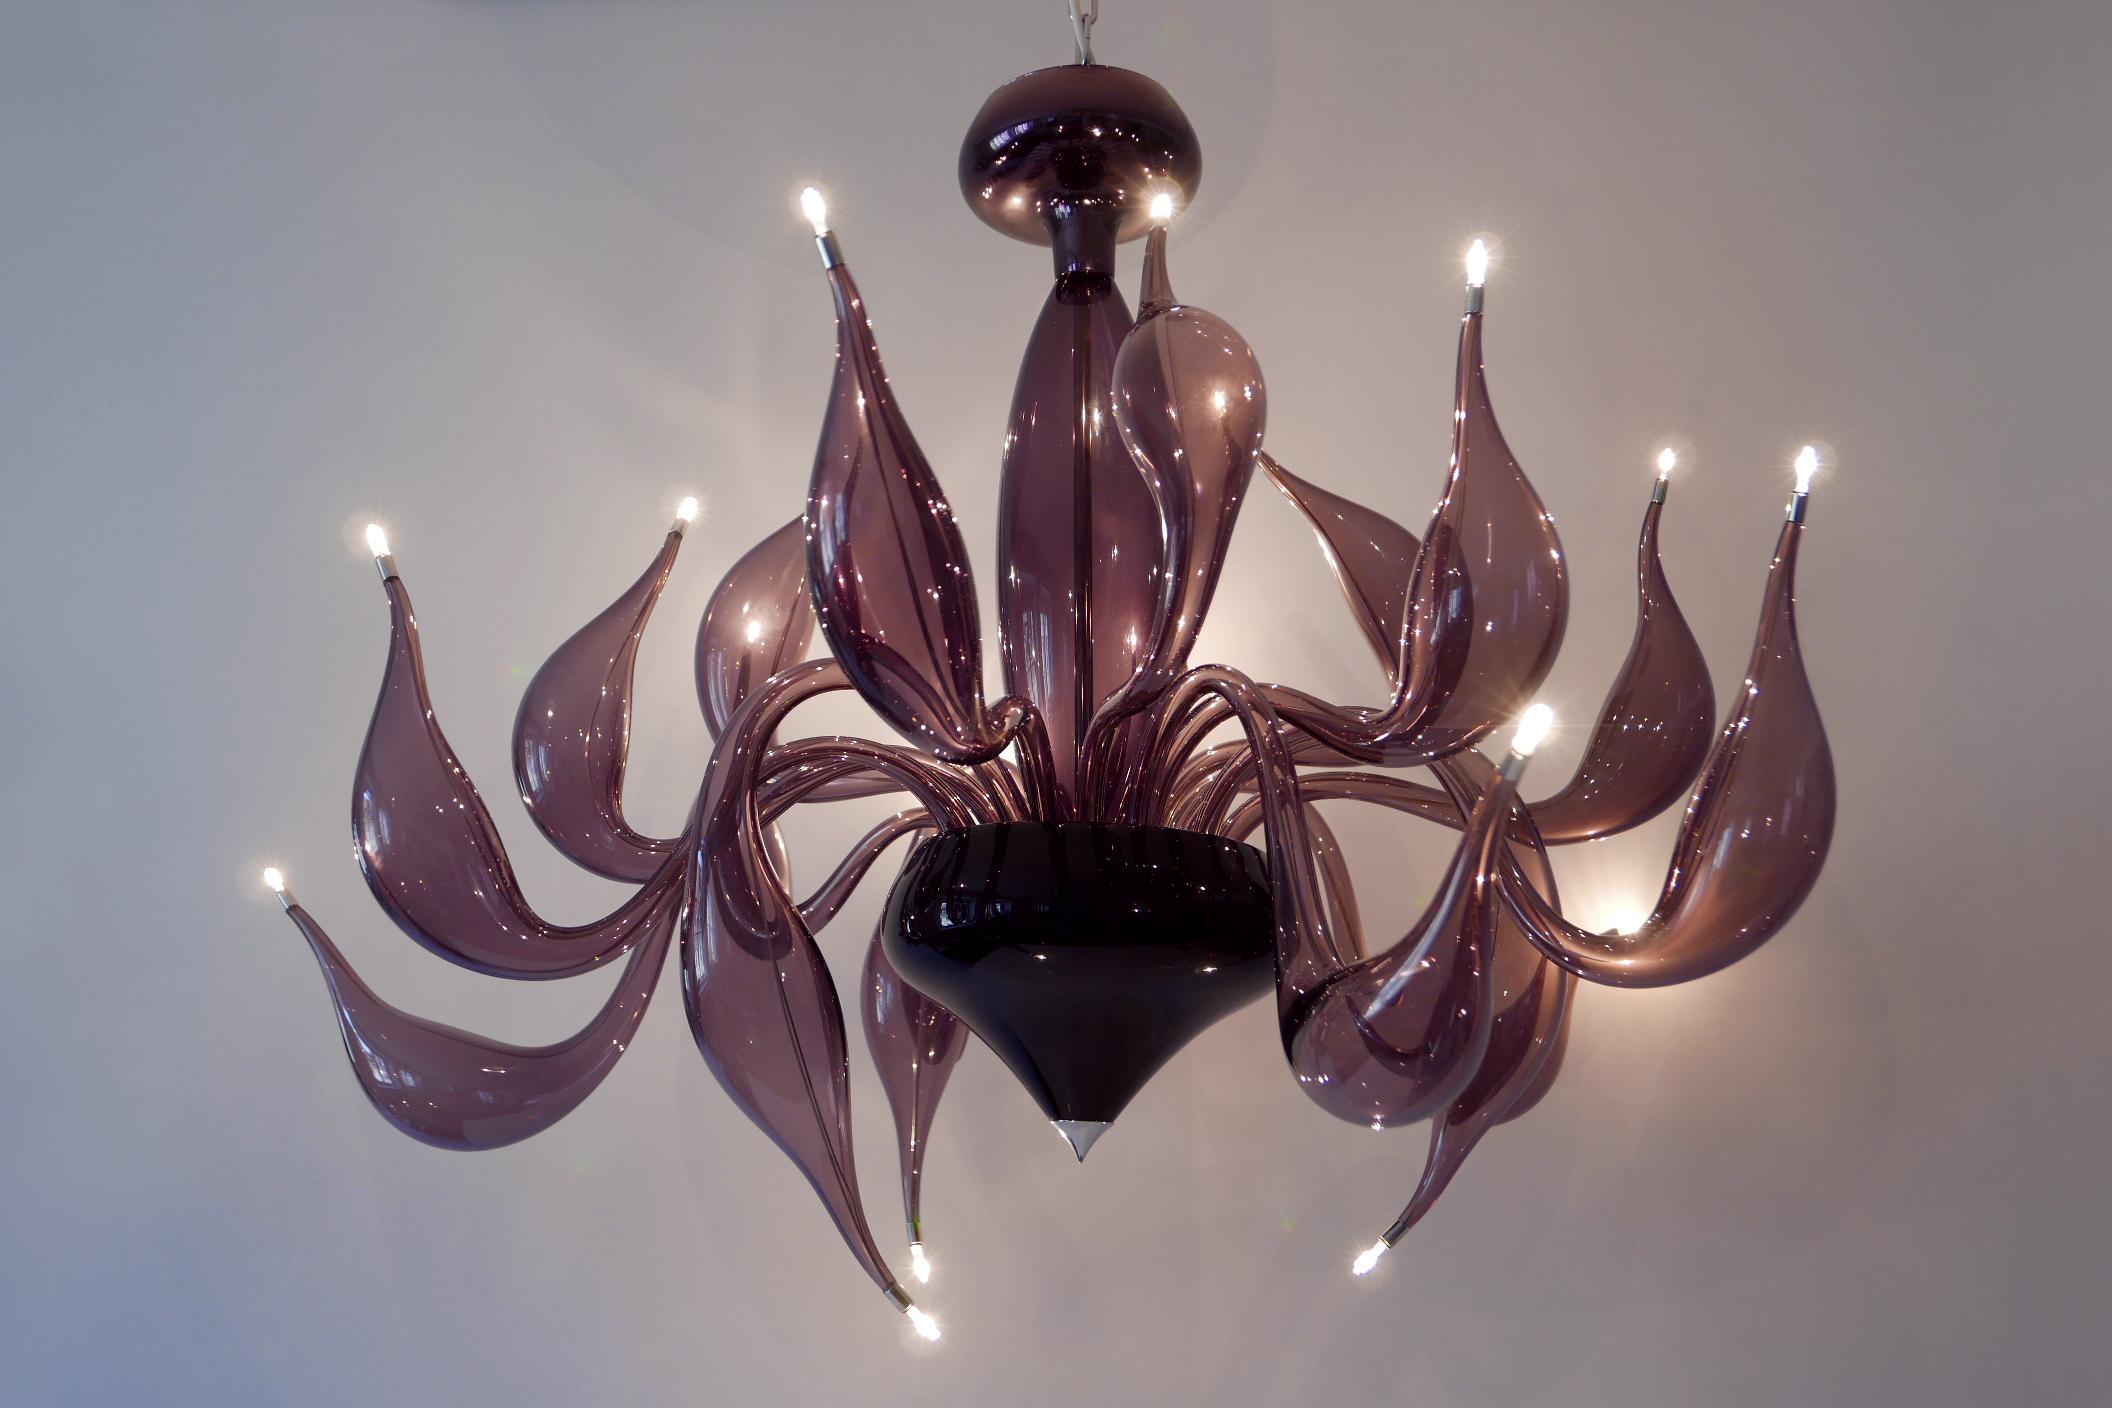 Sculptural Lu Murano Chandelier 18 Lights by Fabio Fornasier, 2004, Italy For Sale 1